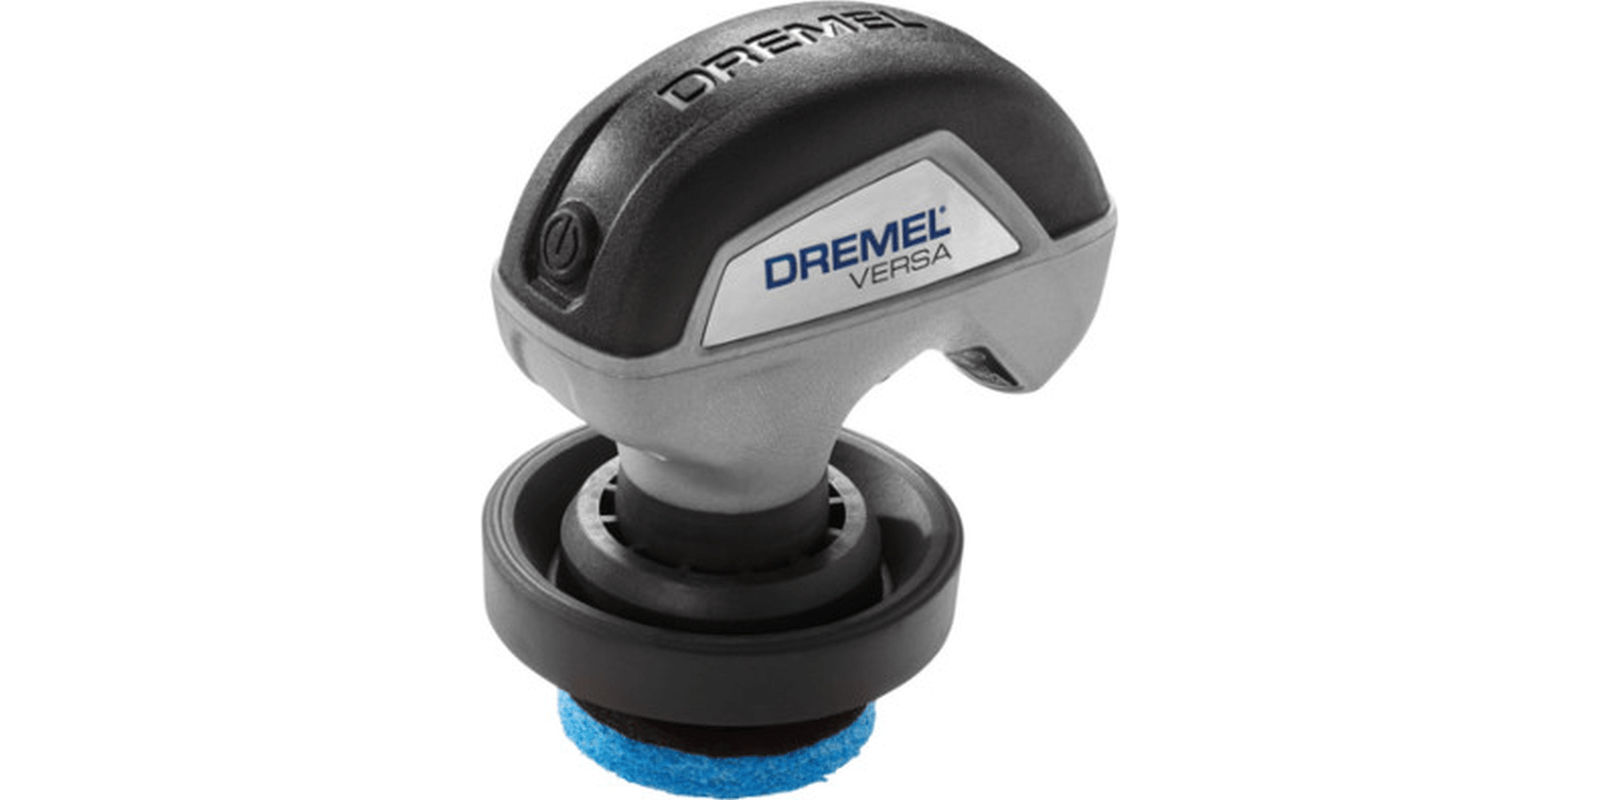 Dremel Versa Review: Is This Small Portable Power Cleaner Worth The Money?